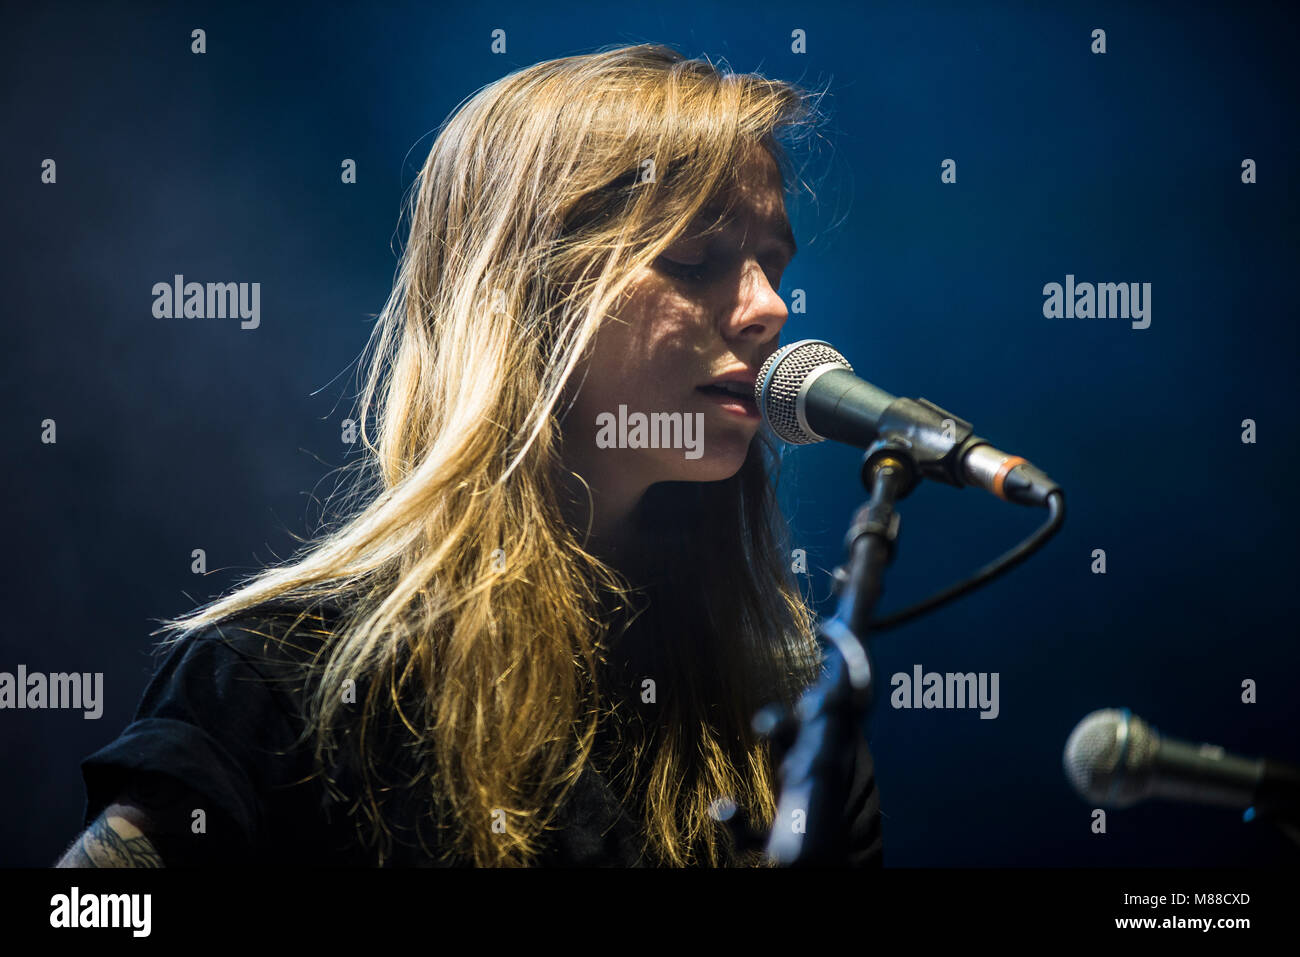 Brighton, East Sussex. 15th March 2018. American indie folk singer and guitarist Julien Baker performs live at the Brighton Dome in support of Belle and Sebastian. The concert follows Belle and Sebastian’s release of a trio of EPs under the name ‘How to Solve Our Human Problems’. Both artists are signed to Matador Records. Credit: Francesca Moore/Alamy Live News Stock Photo